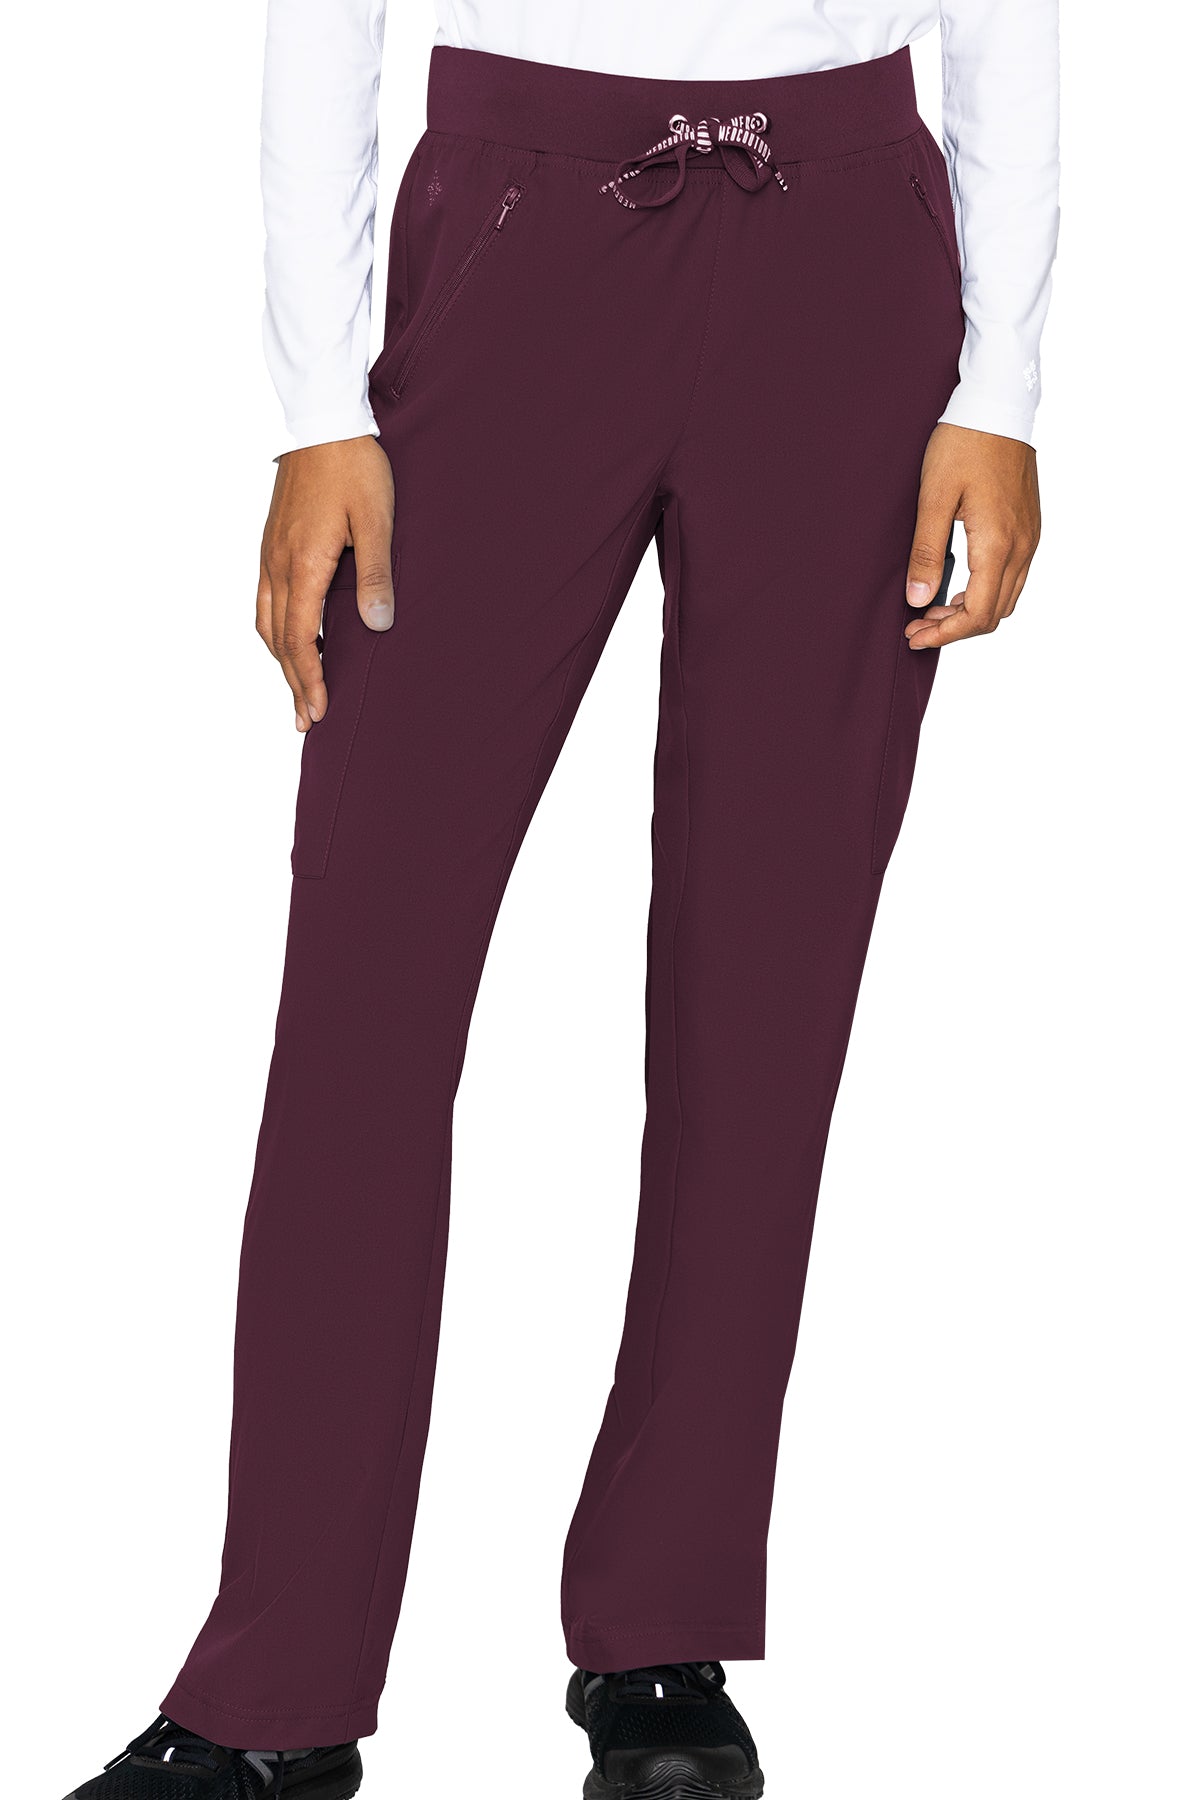 Med Couture Scrub Pants Insight Zipper Pocket Pant in Wine at Parker's Clothing and Shoes